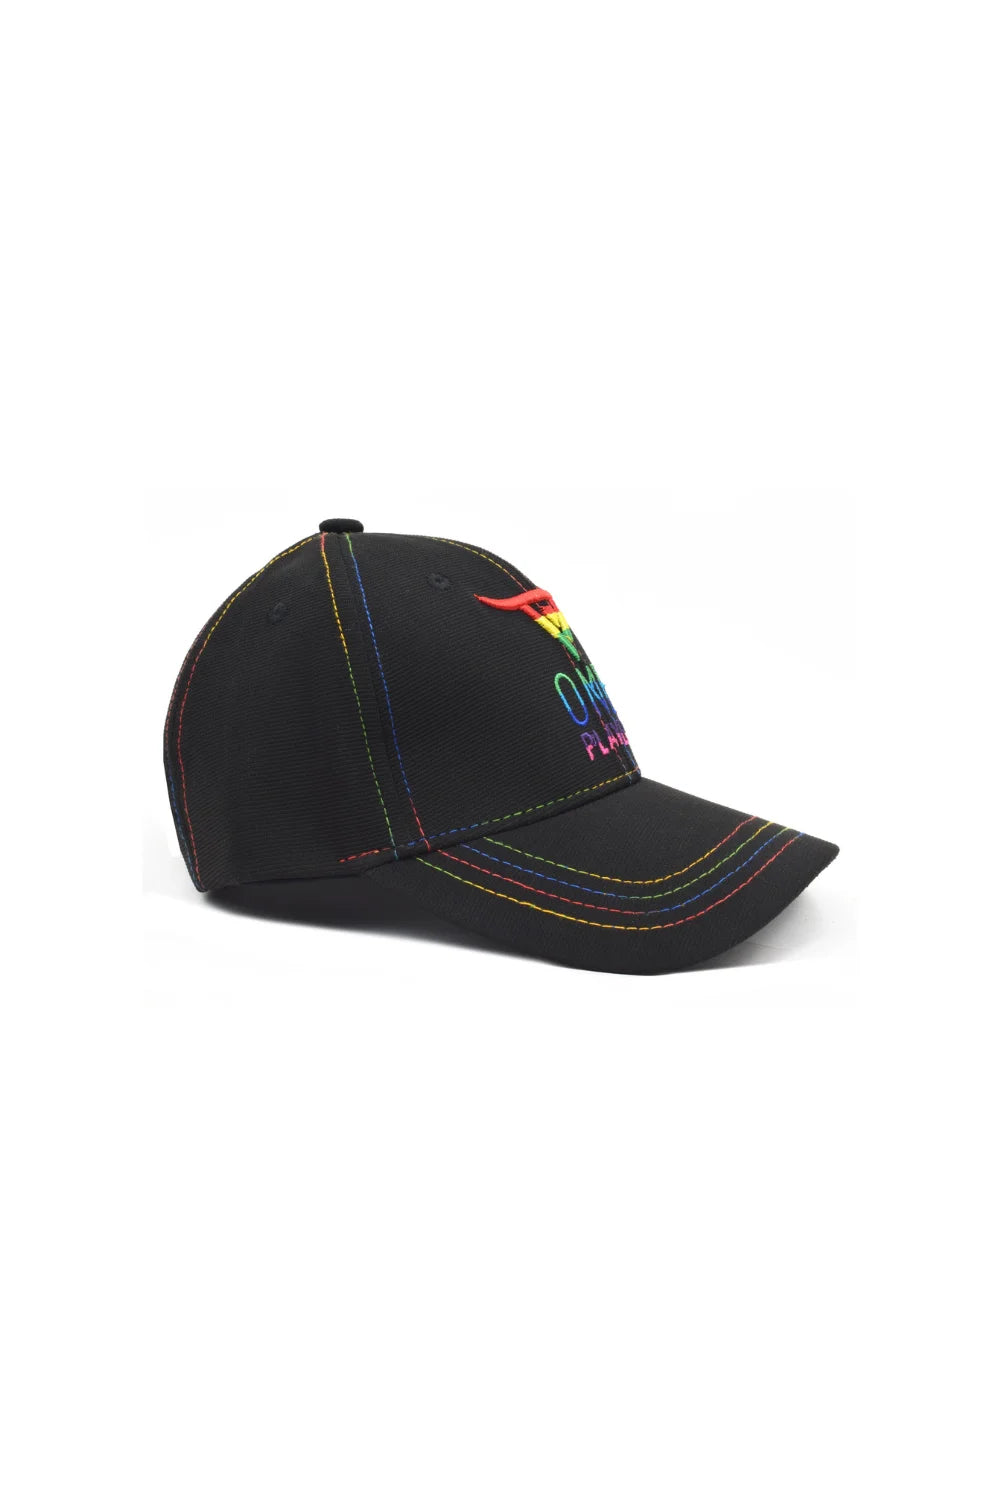 Unisex Black Multi Color  Limited Edition Cap by One Player